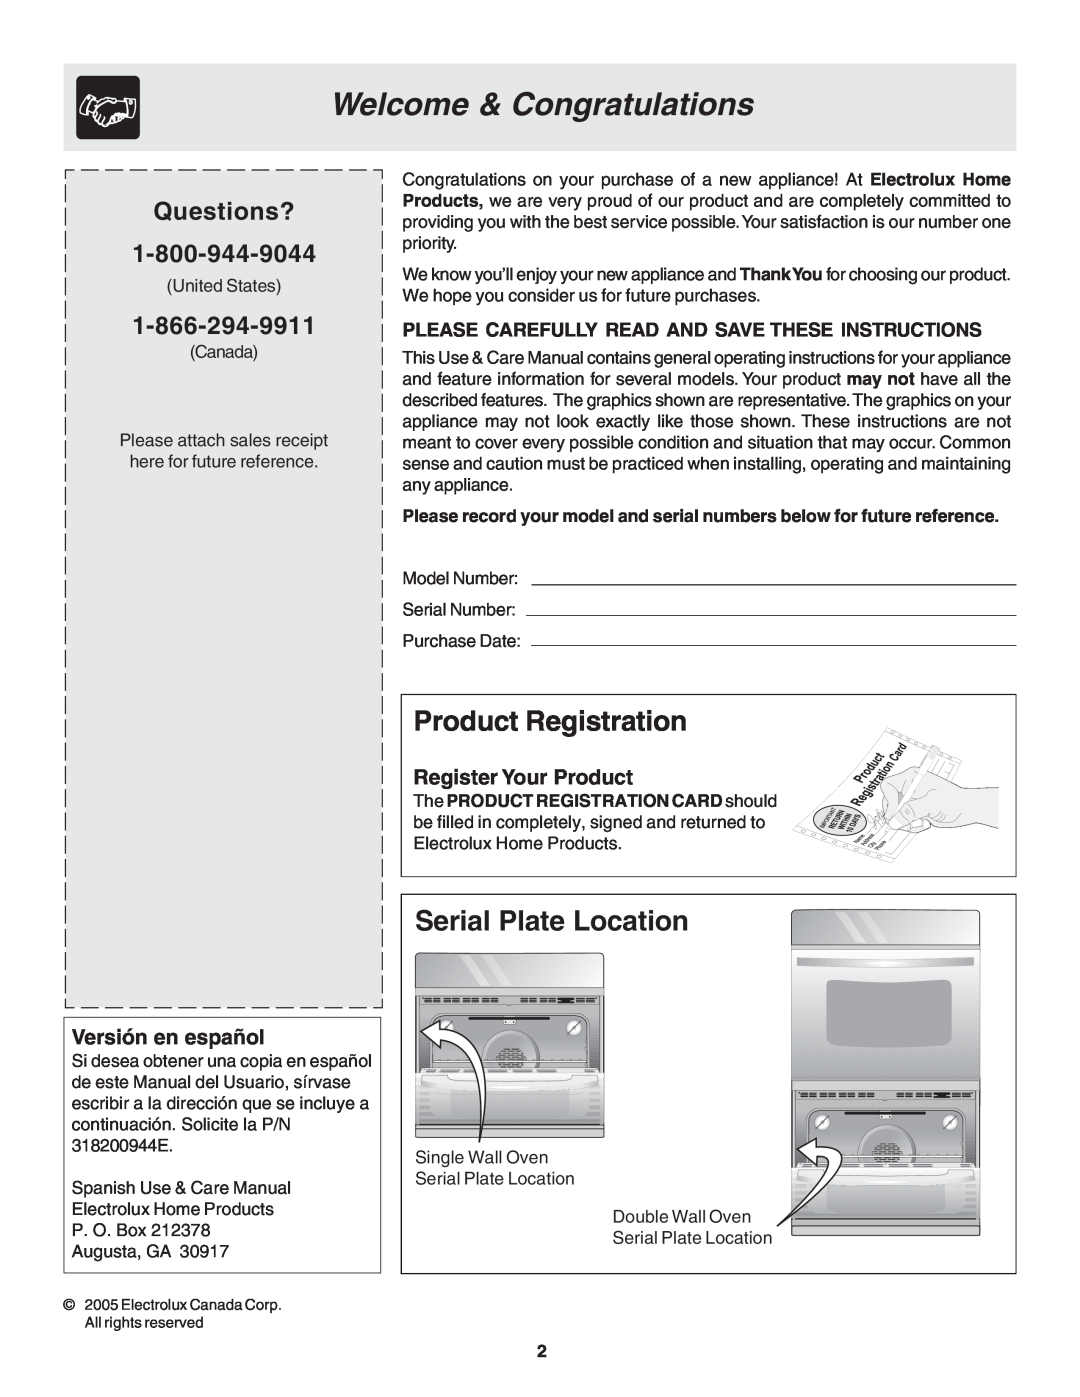 Frigidaire 318200944 manual Welcome & Congratulations, Product Registration, Serial Plate Location, Questions? 